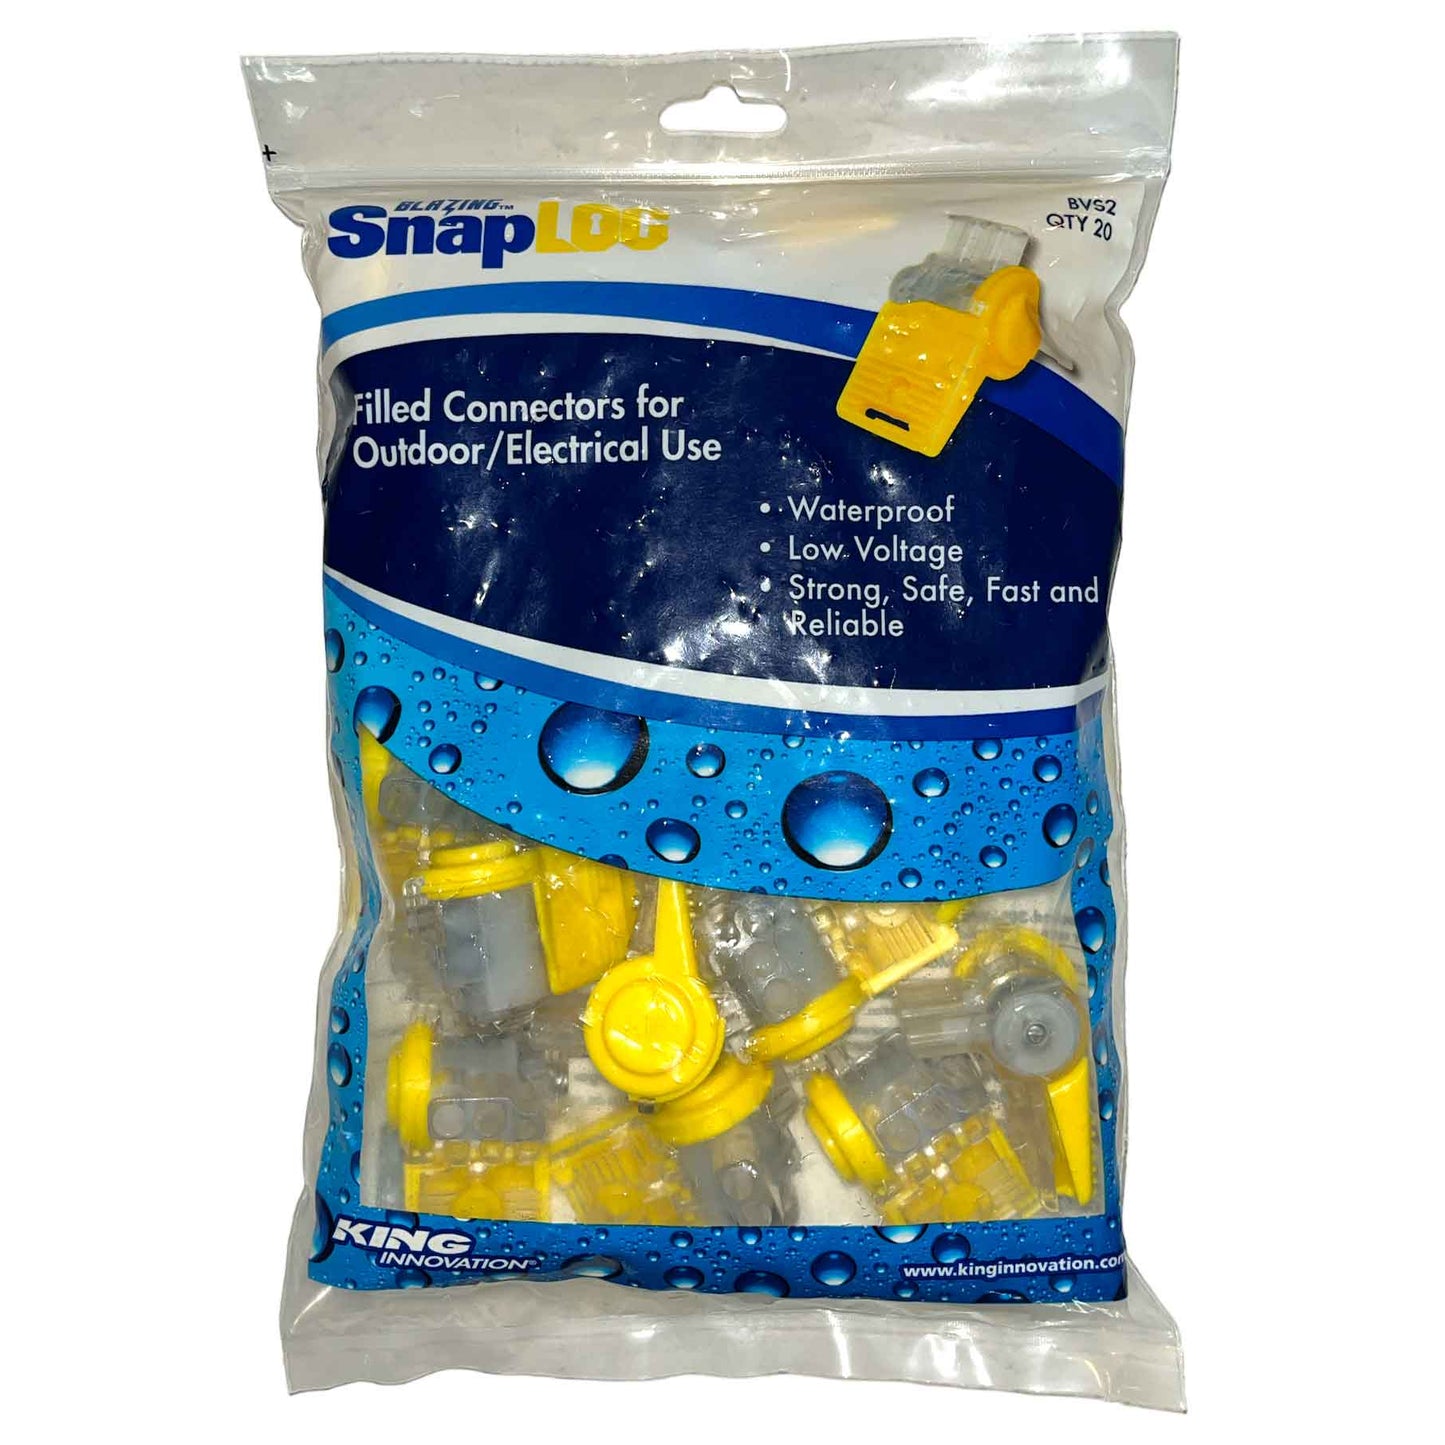 King Innovations Blazing BVS-2 Snap Lock Low Voltage Wire Connectors, Bag of 20